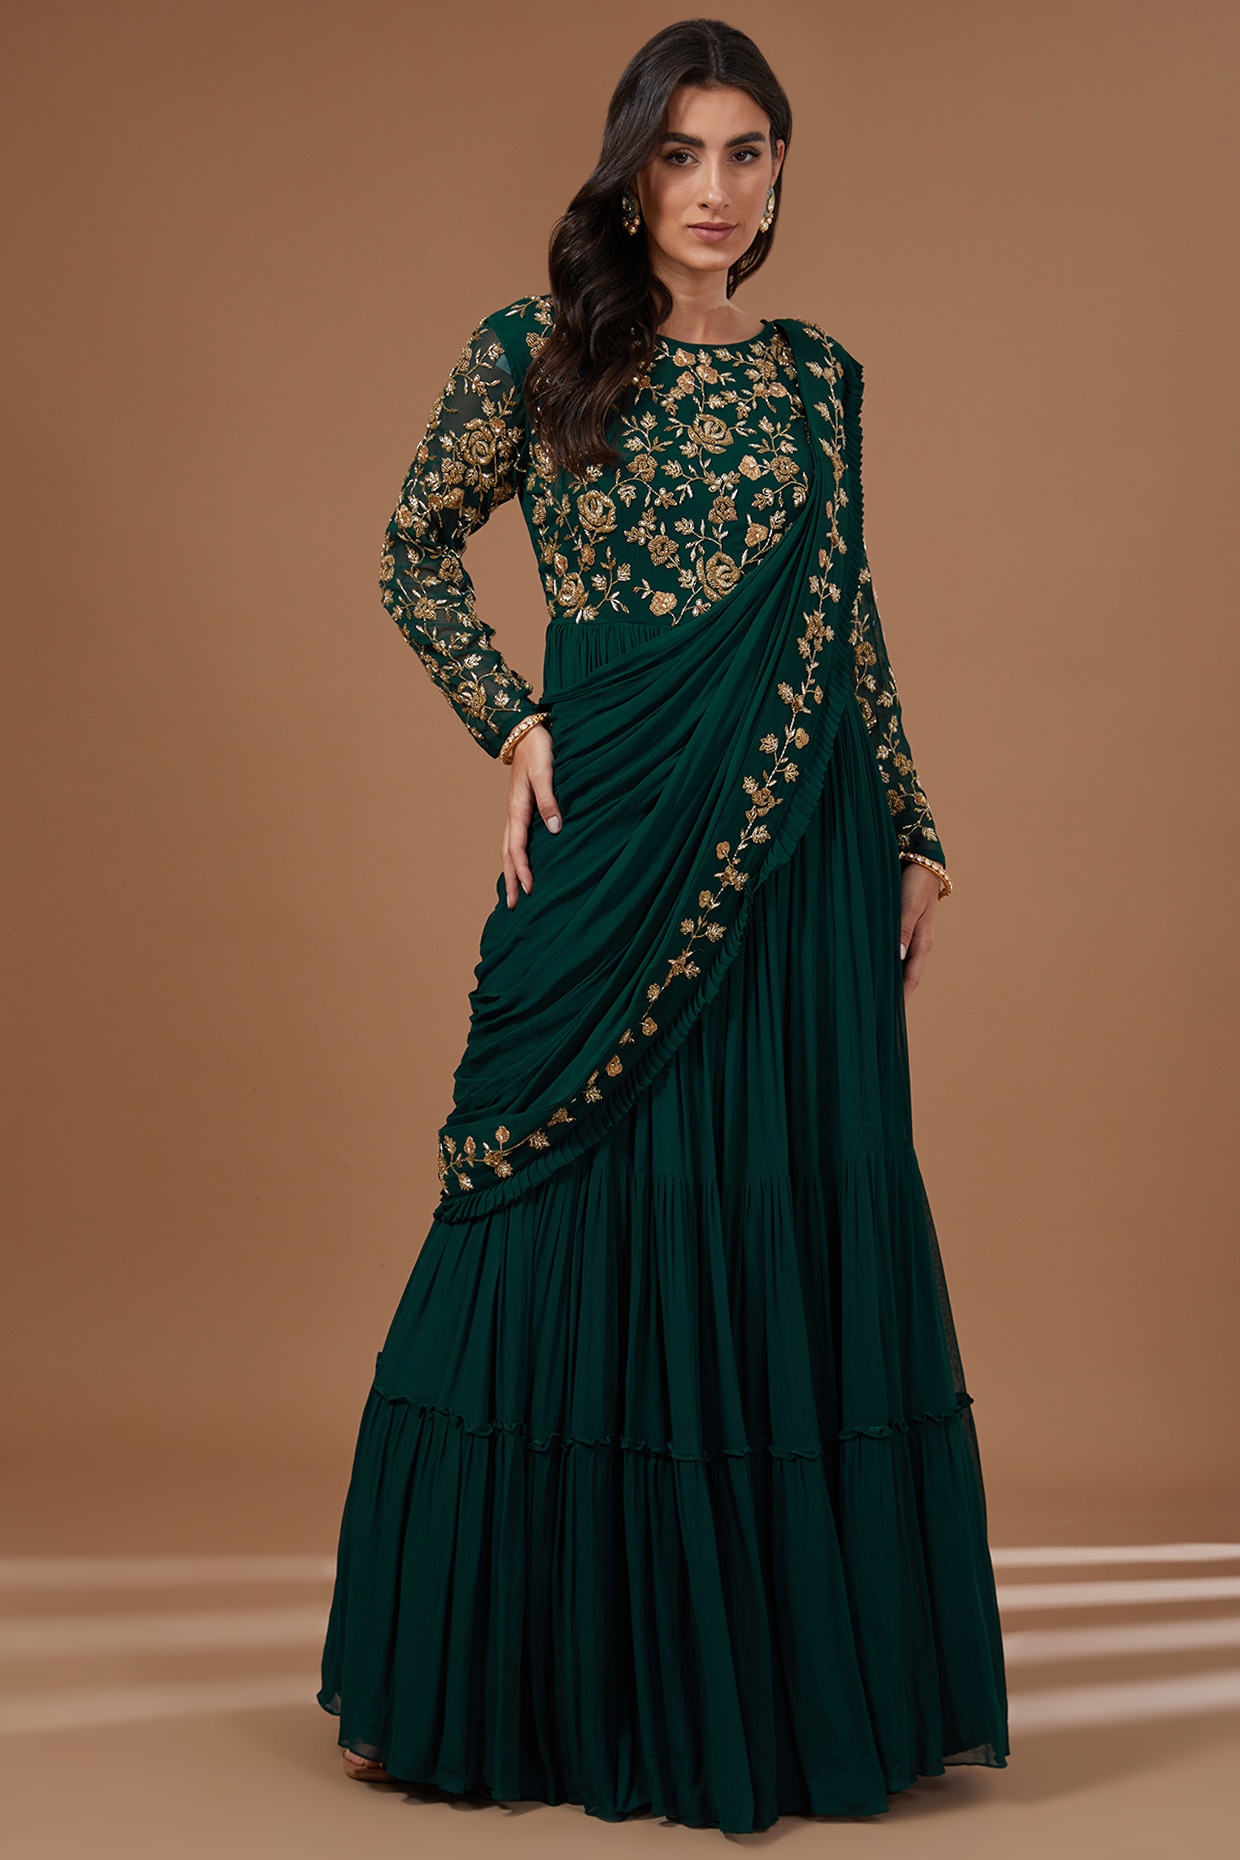 Pin by Arts and crafts on looks to try | Indian gowns dresses, Indian  fashion dresses, Saree dress